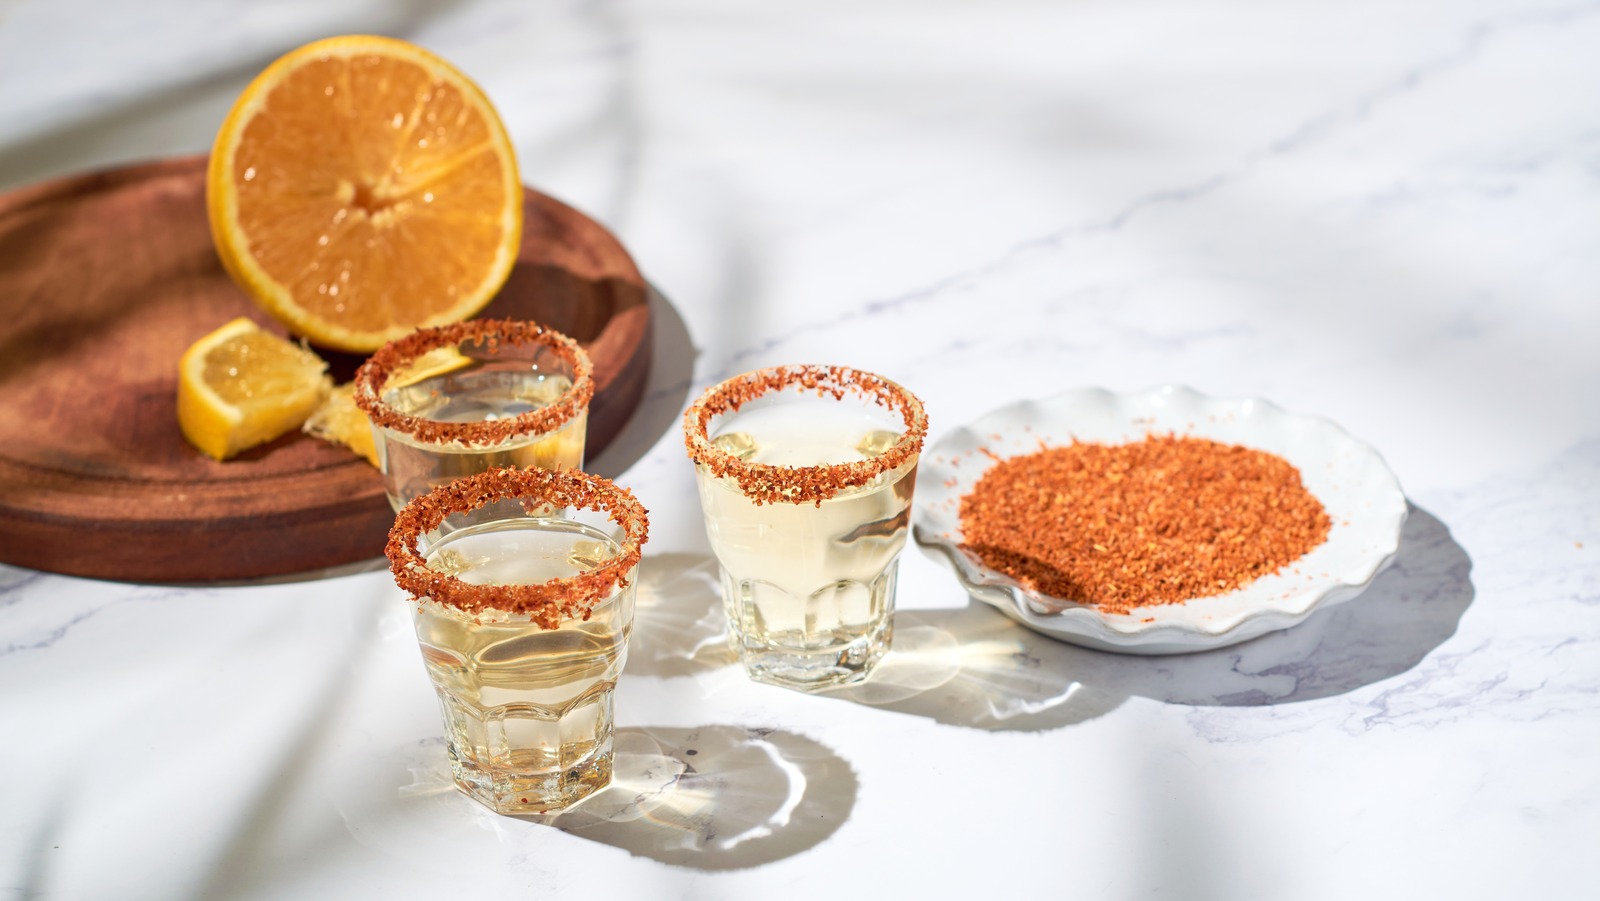 Cocktails made with mezcal, the ancestral Mexican drink